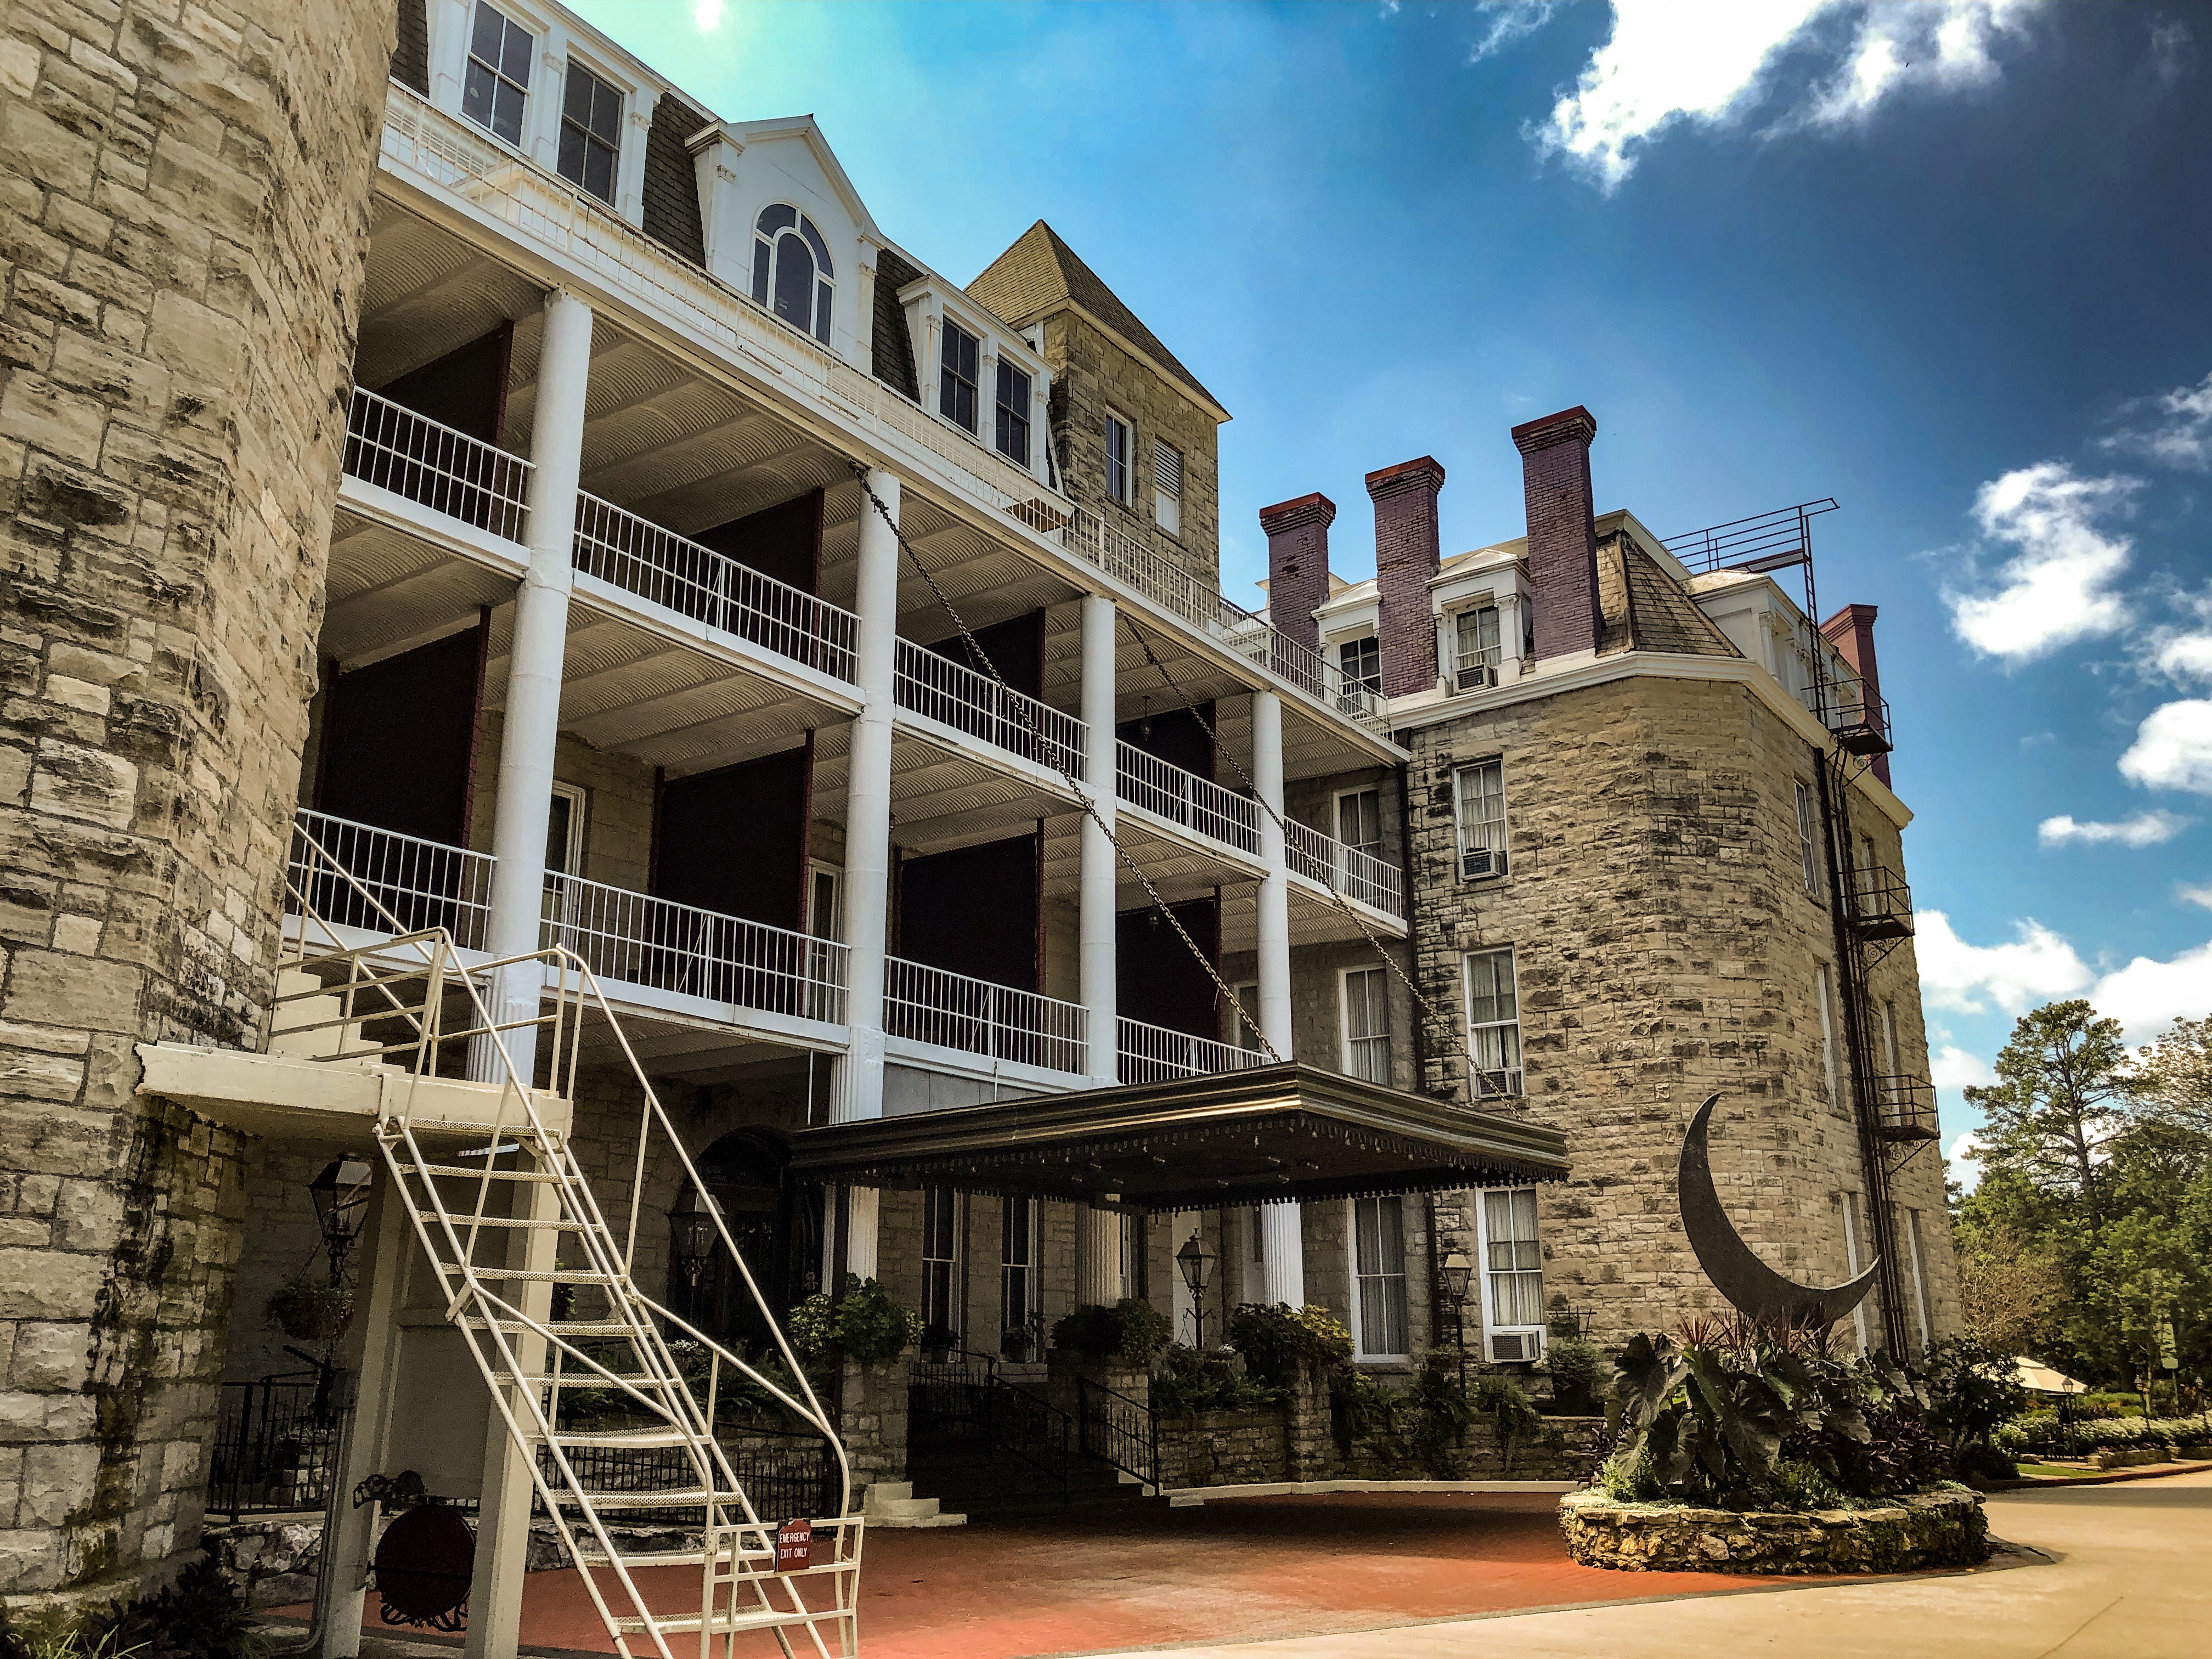 The Crescent Hotel 5 Reasons to Stay – Review of our Stay at the Crescent Hotel in Eureka Springs